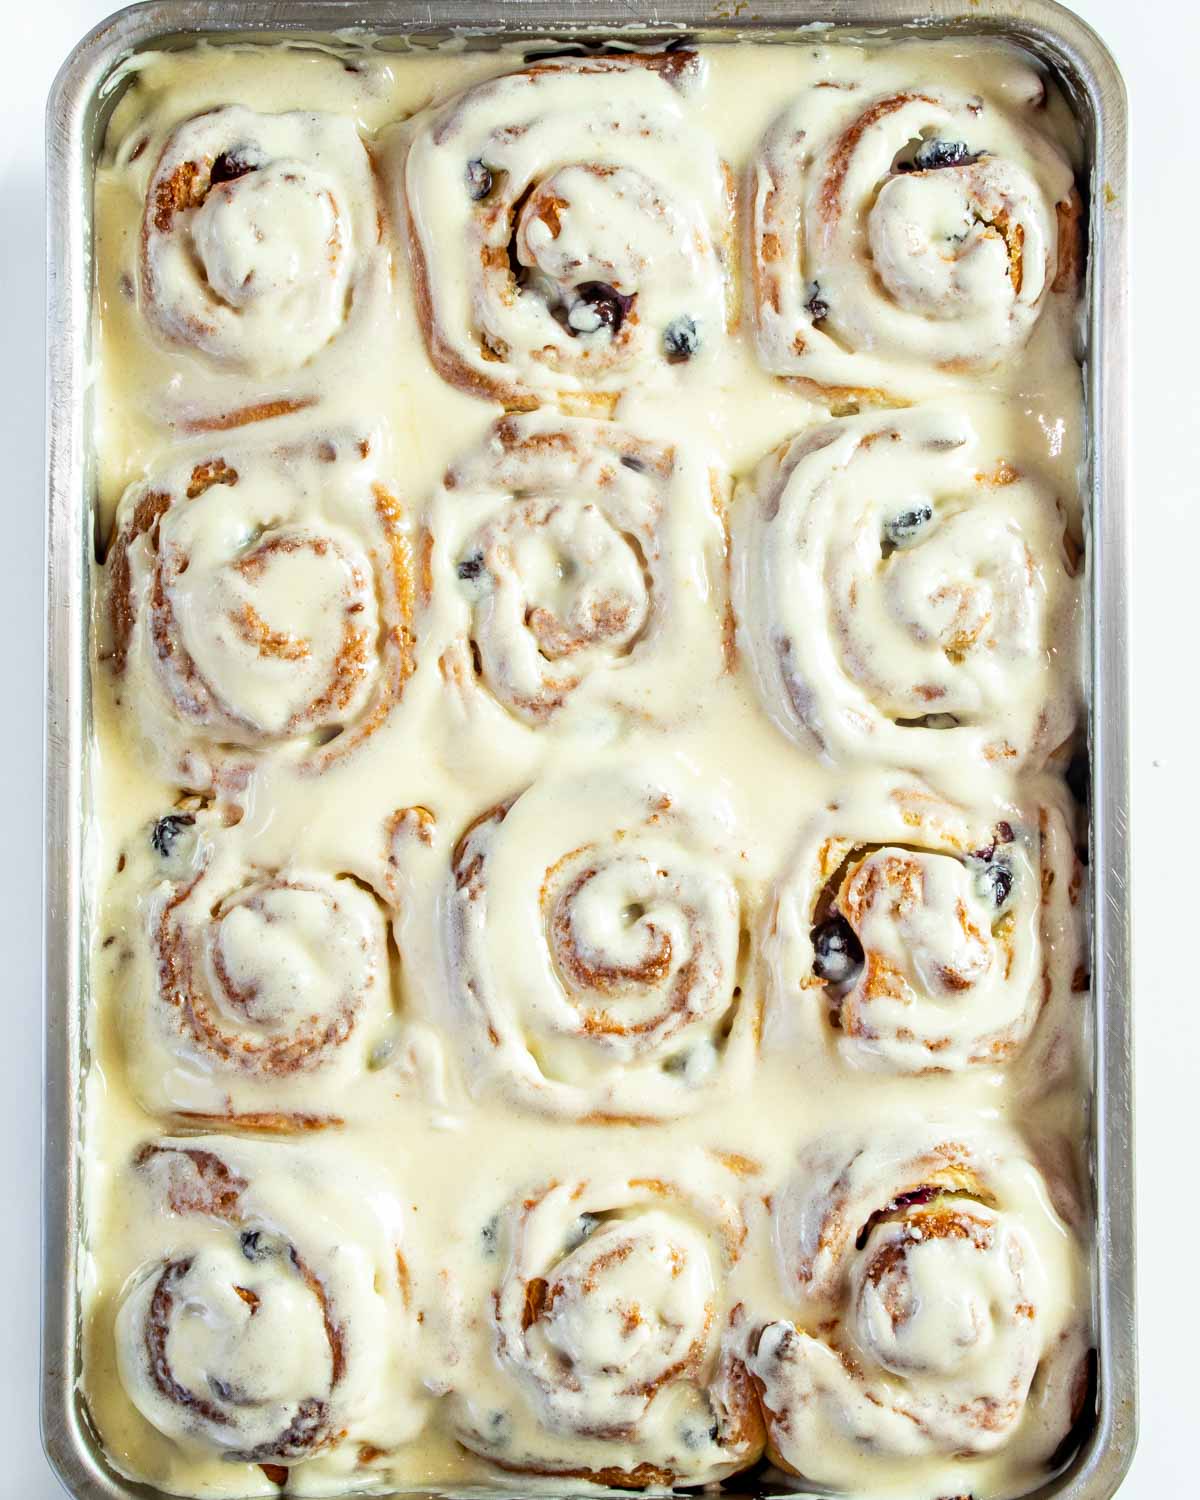 blueberry lemon rolls with cream cheese icing in a baking dish.